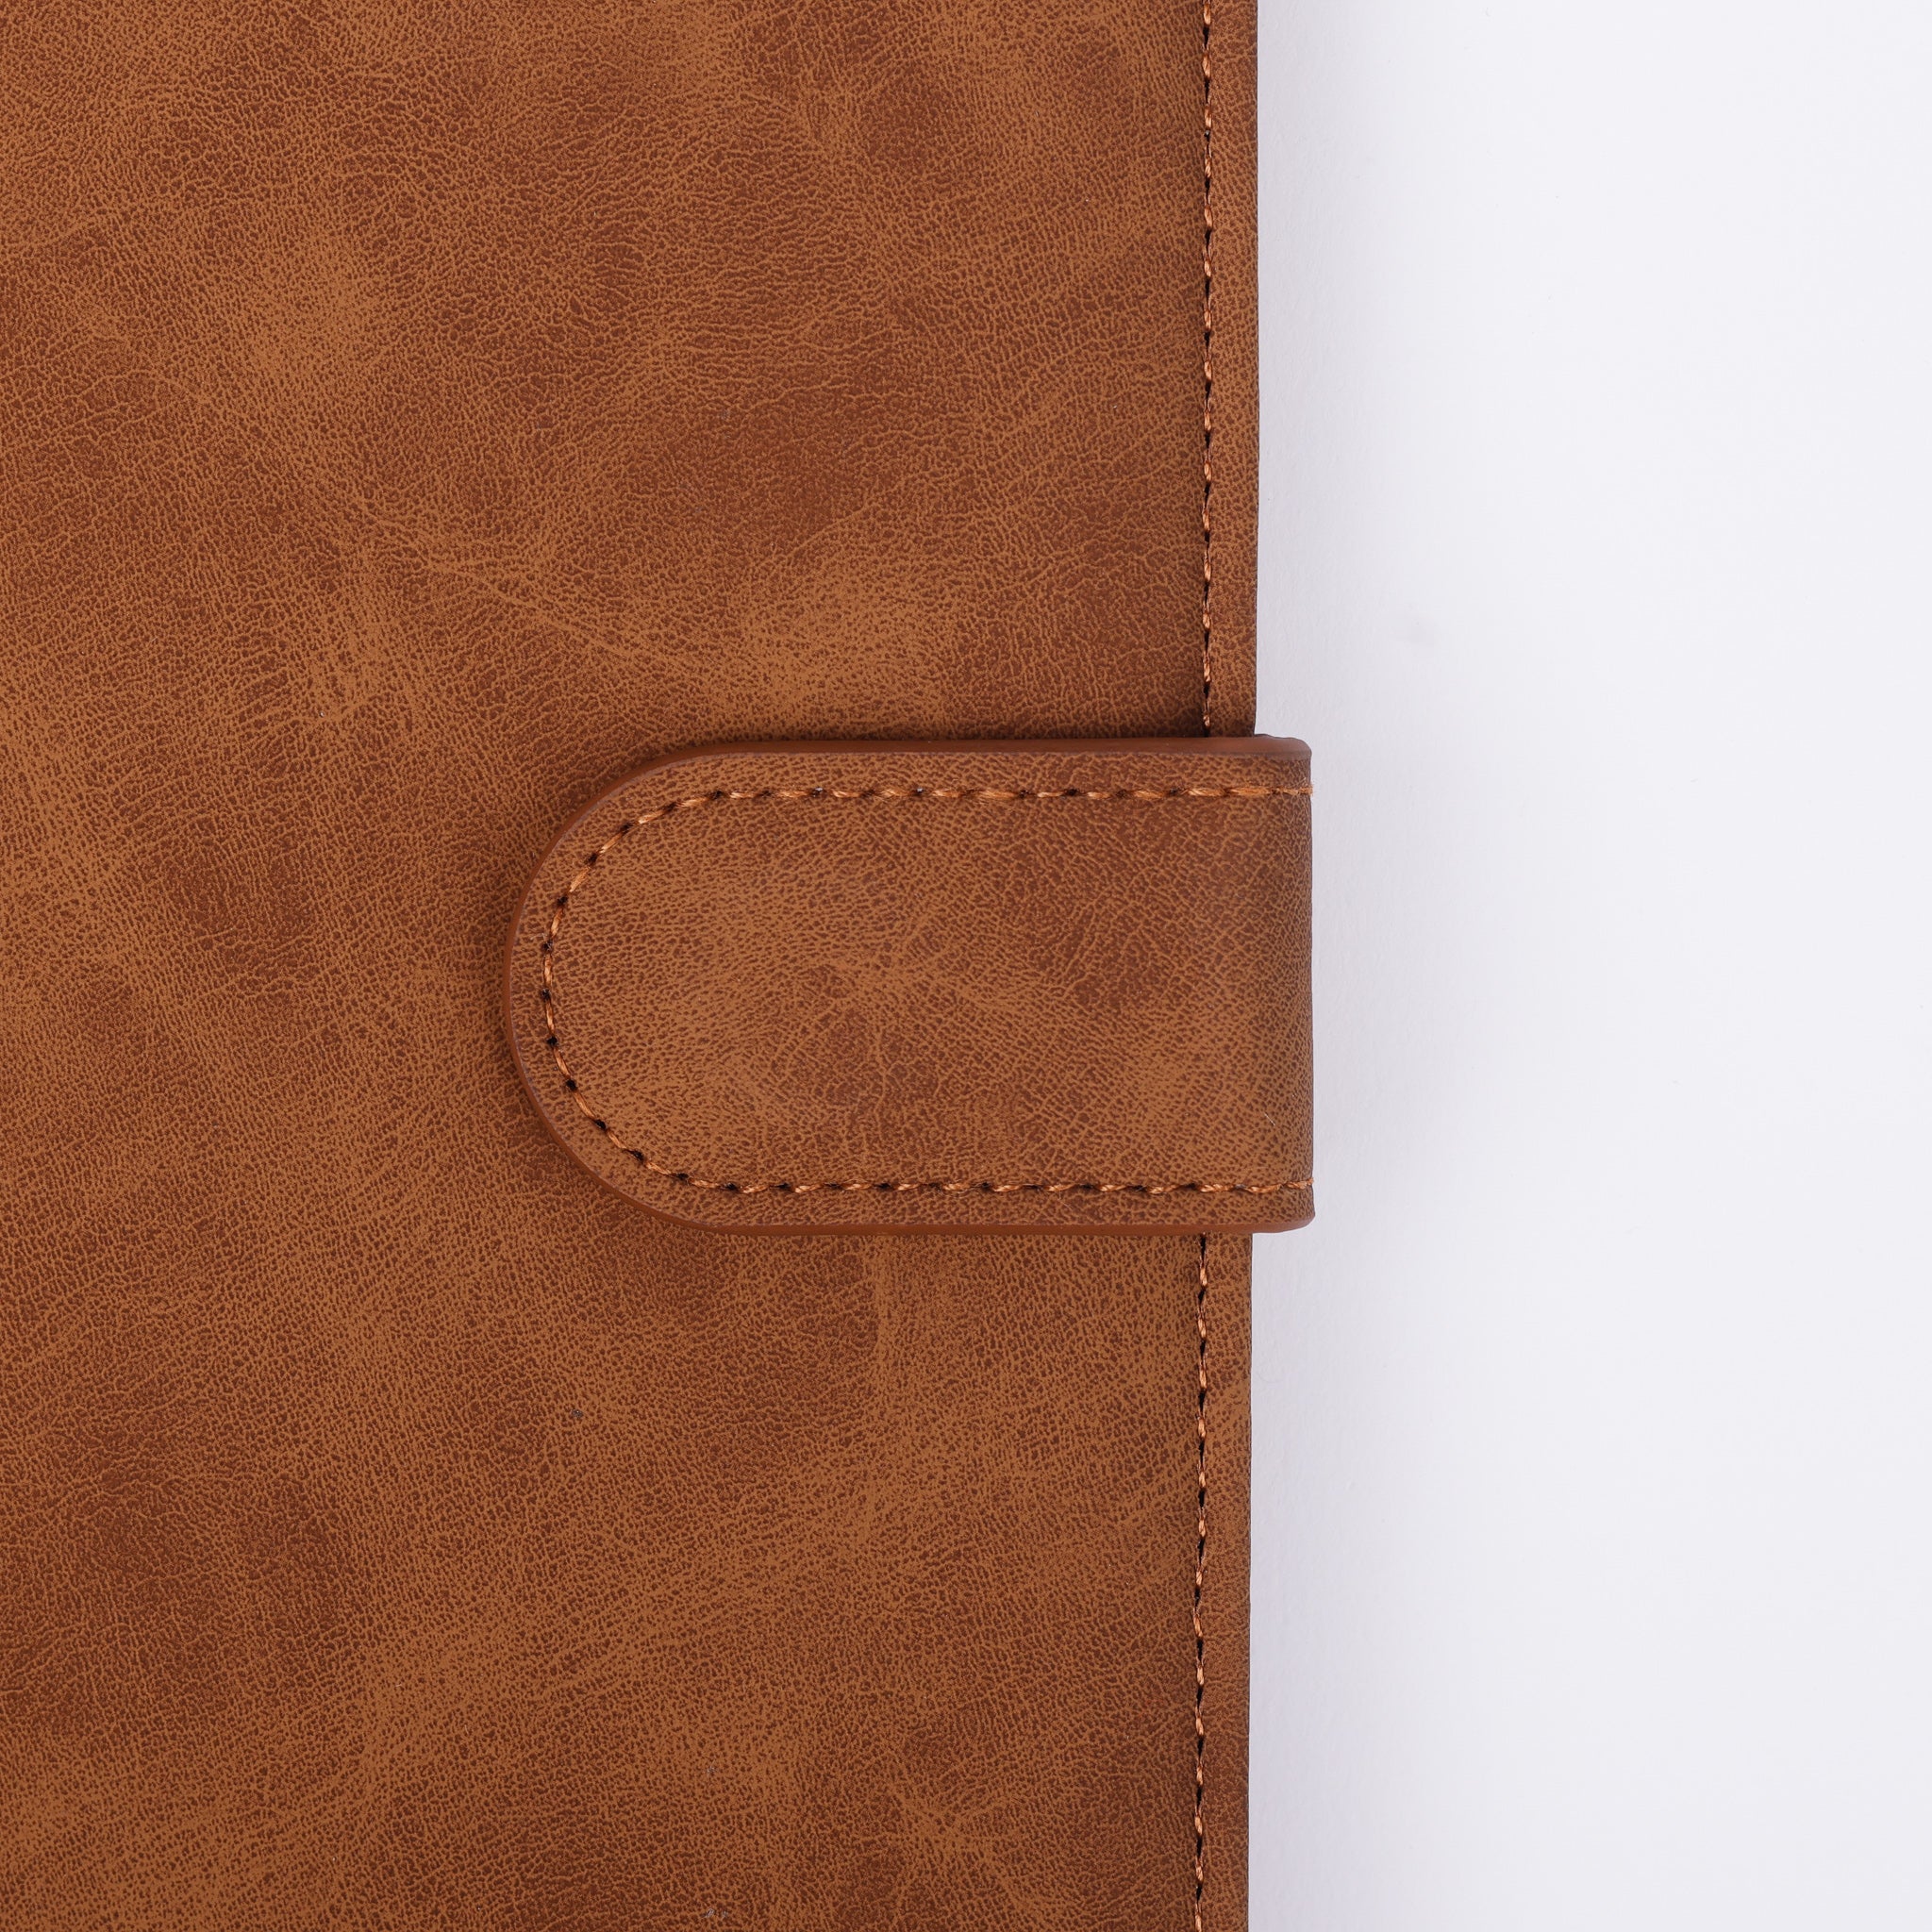 Washed Texture Vegan Leather Wallet